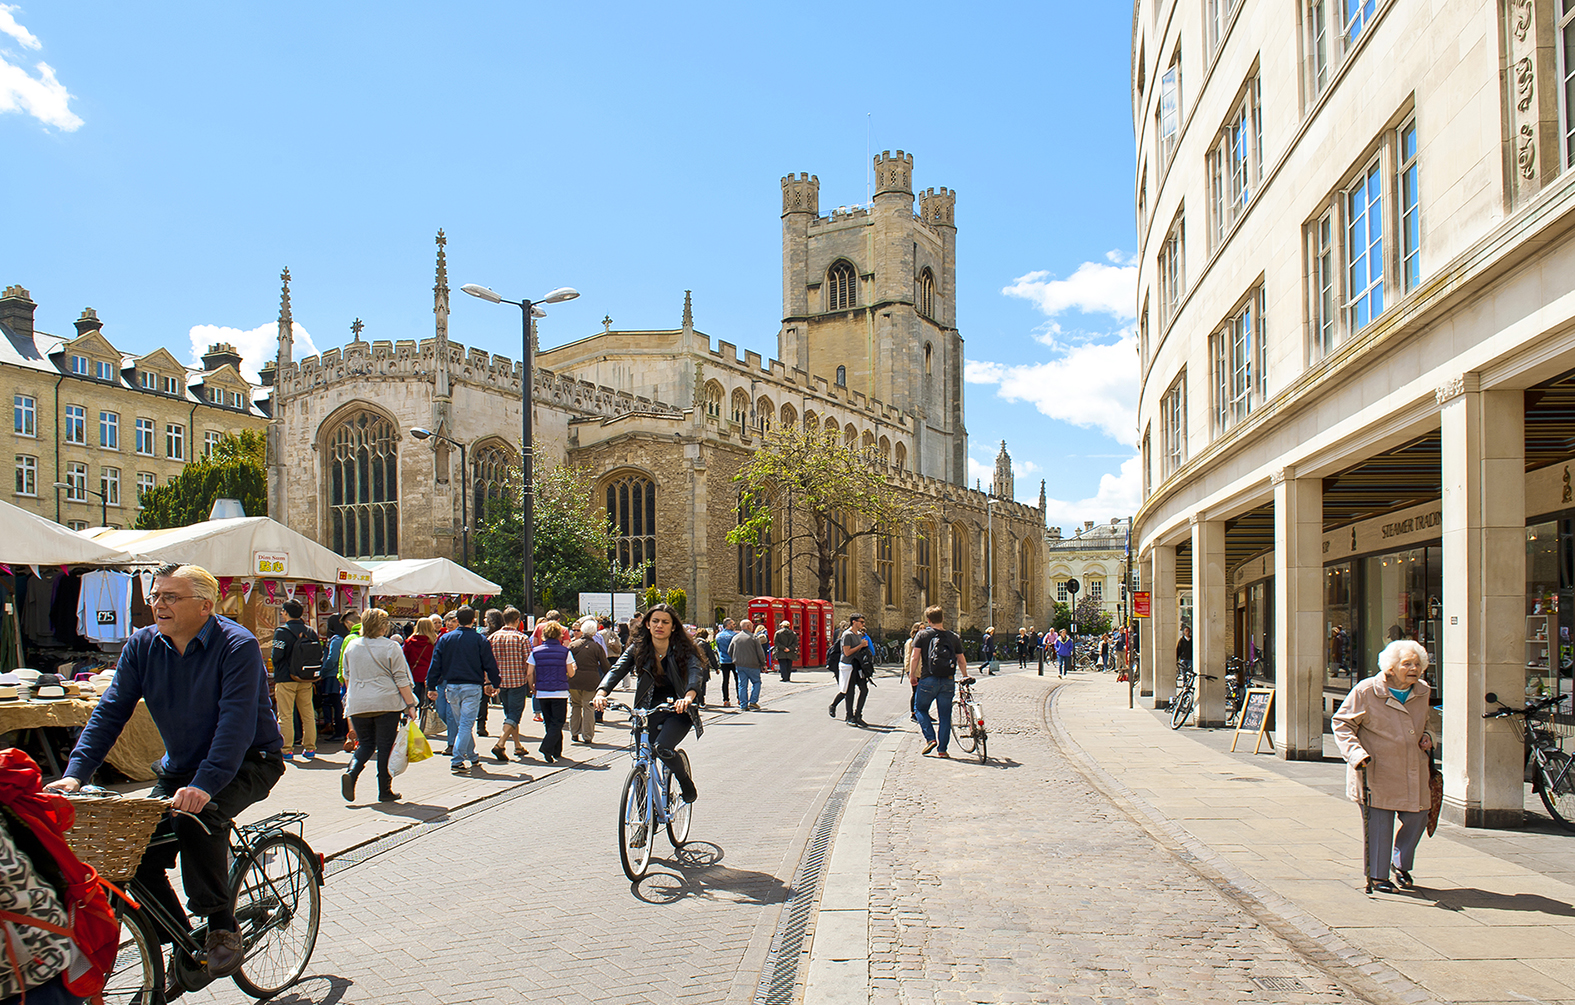 Cambridge, England - May 28, 2015: People biking at the Market square near by St. Marys church in Cambridge